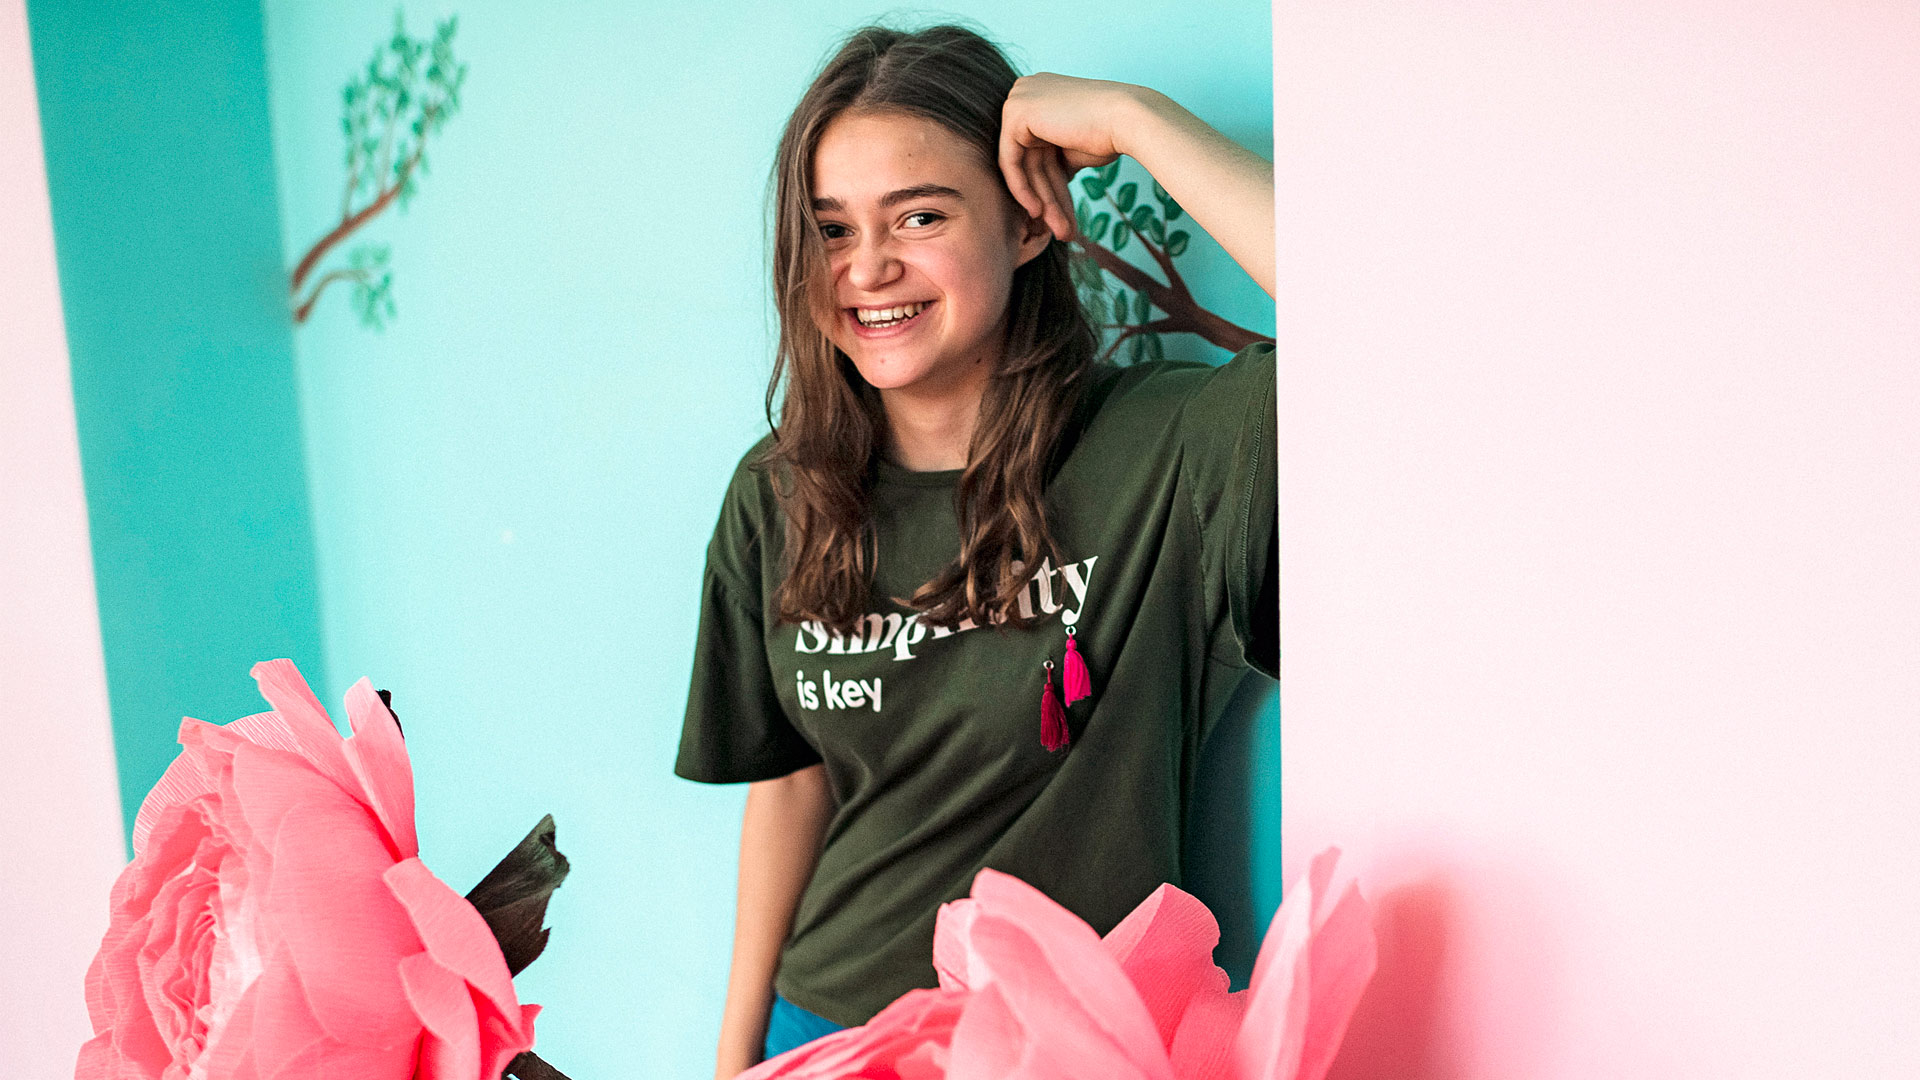 A teenaged girl laughs as she leans against a brightly coloured wall. Pink flowers are in the foreground